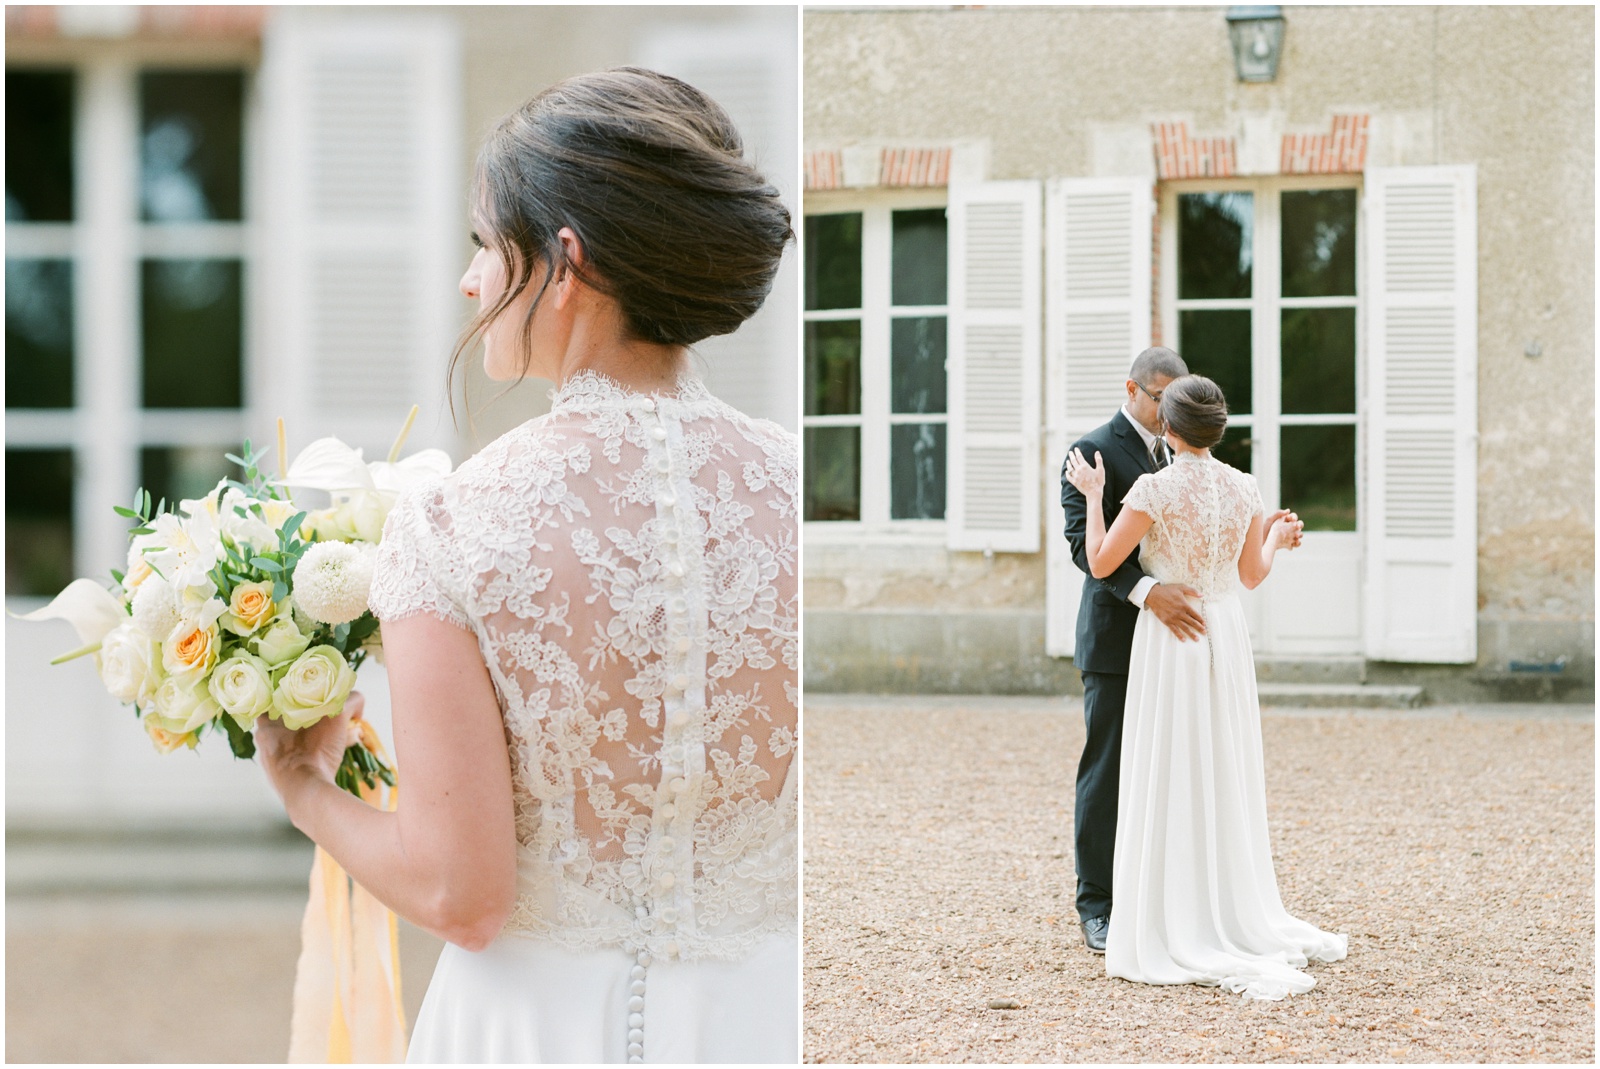 Elegant chateau wedding with bride in lace dress